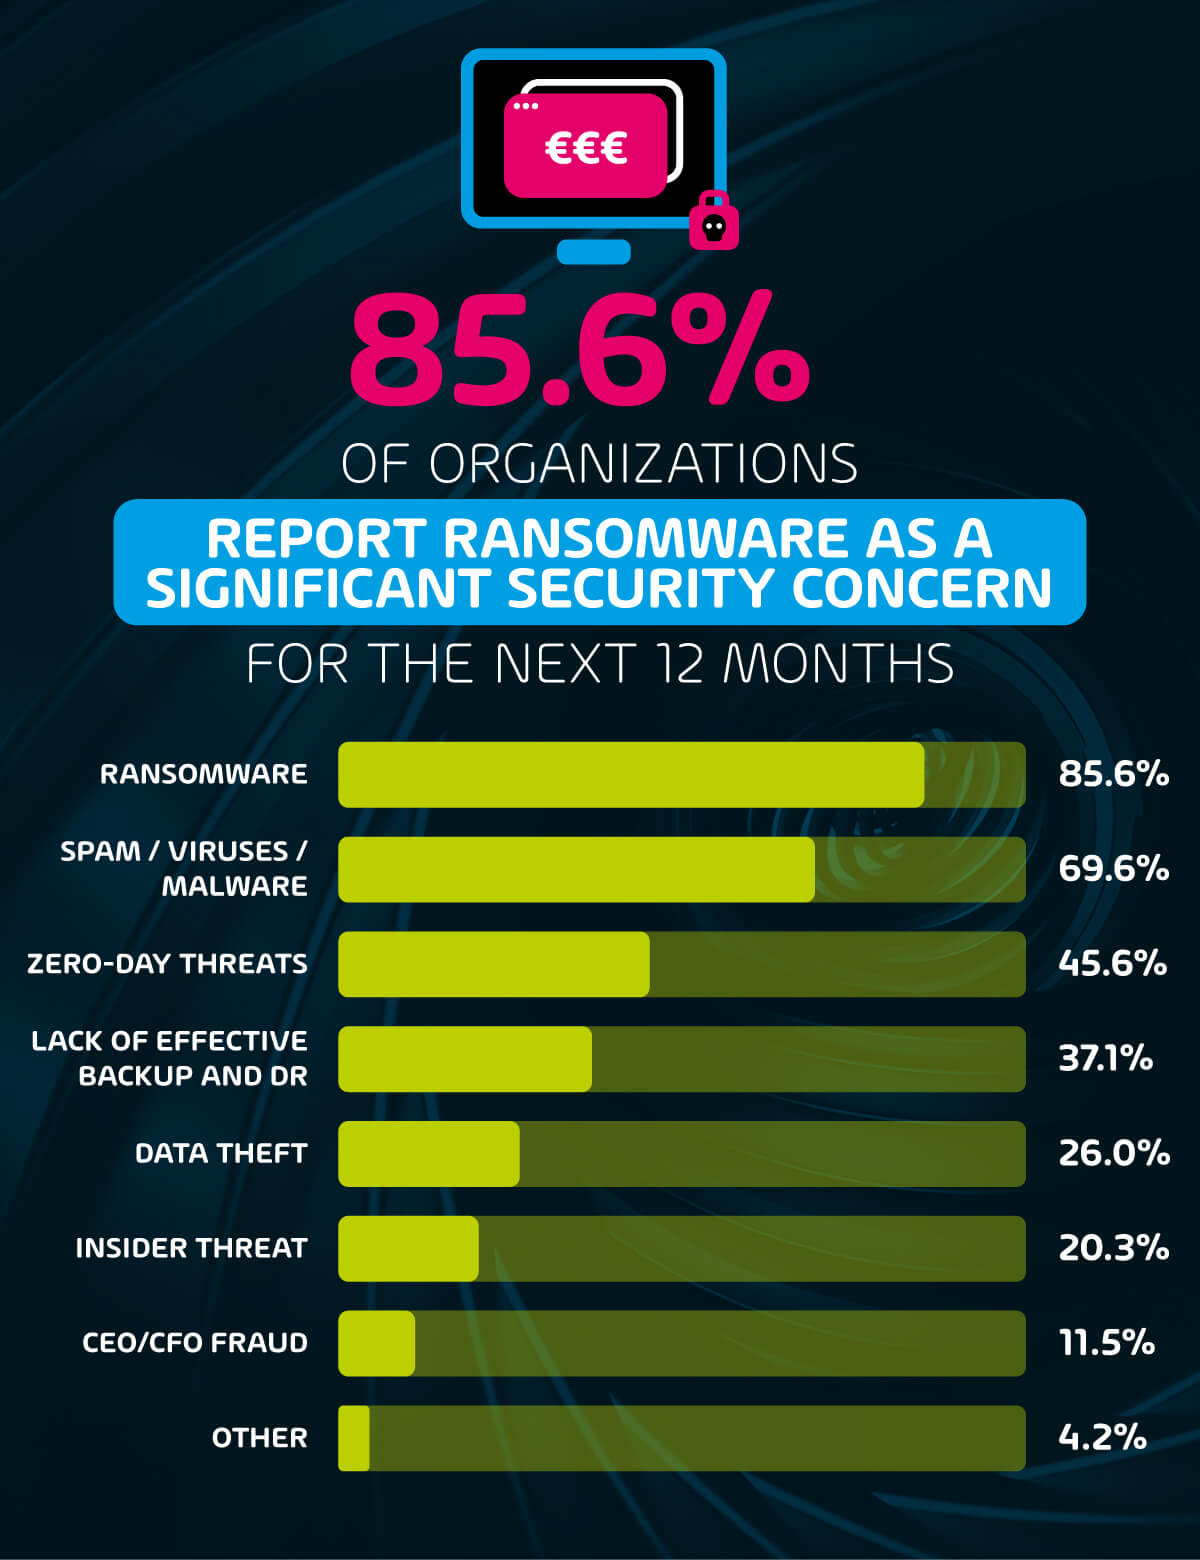 85.6% of organizations report Ransomware as a significant security concern for the next 12 months